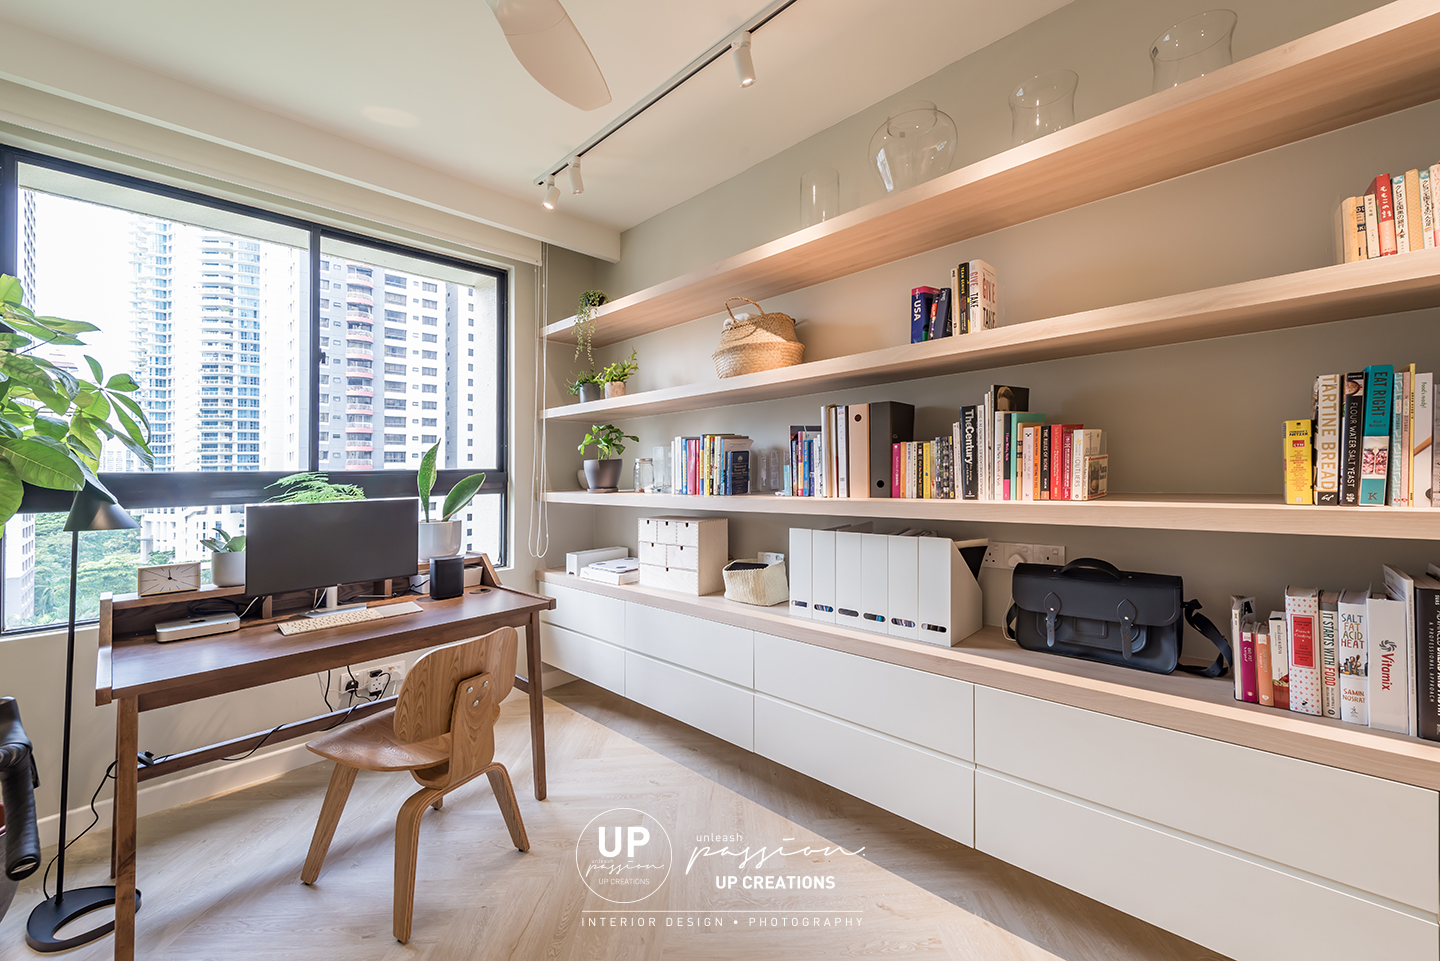 Mont Kiara Pines condo study room with wood texture shelf and white color cabinet and a solid wood study table